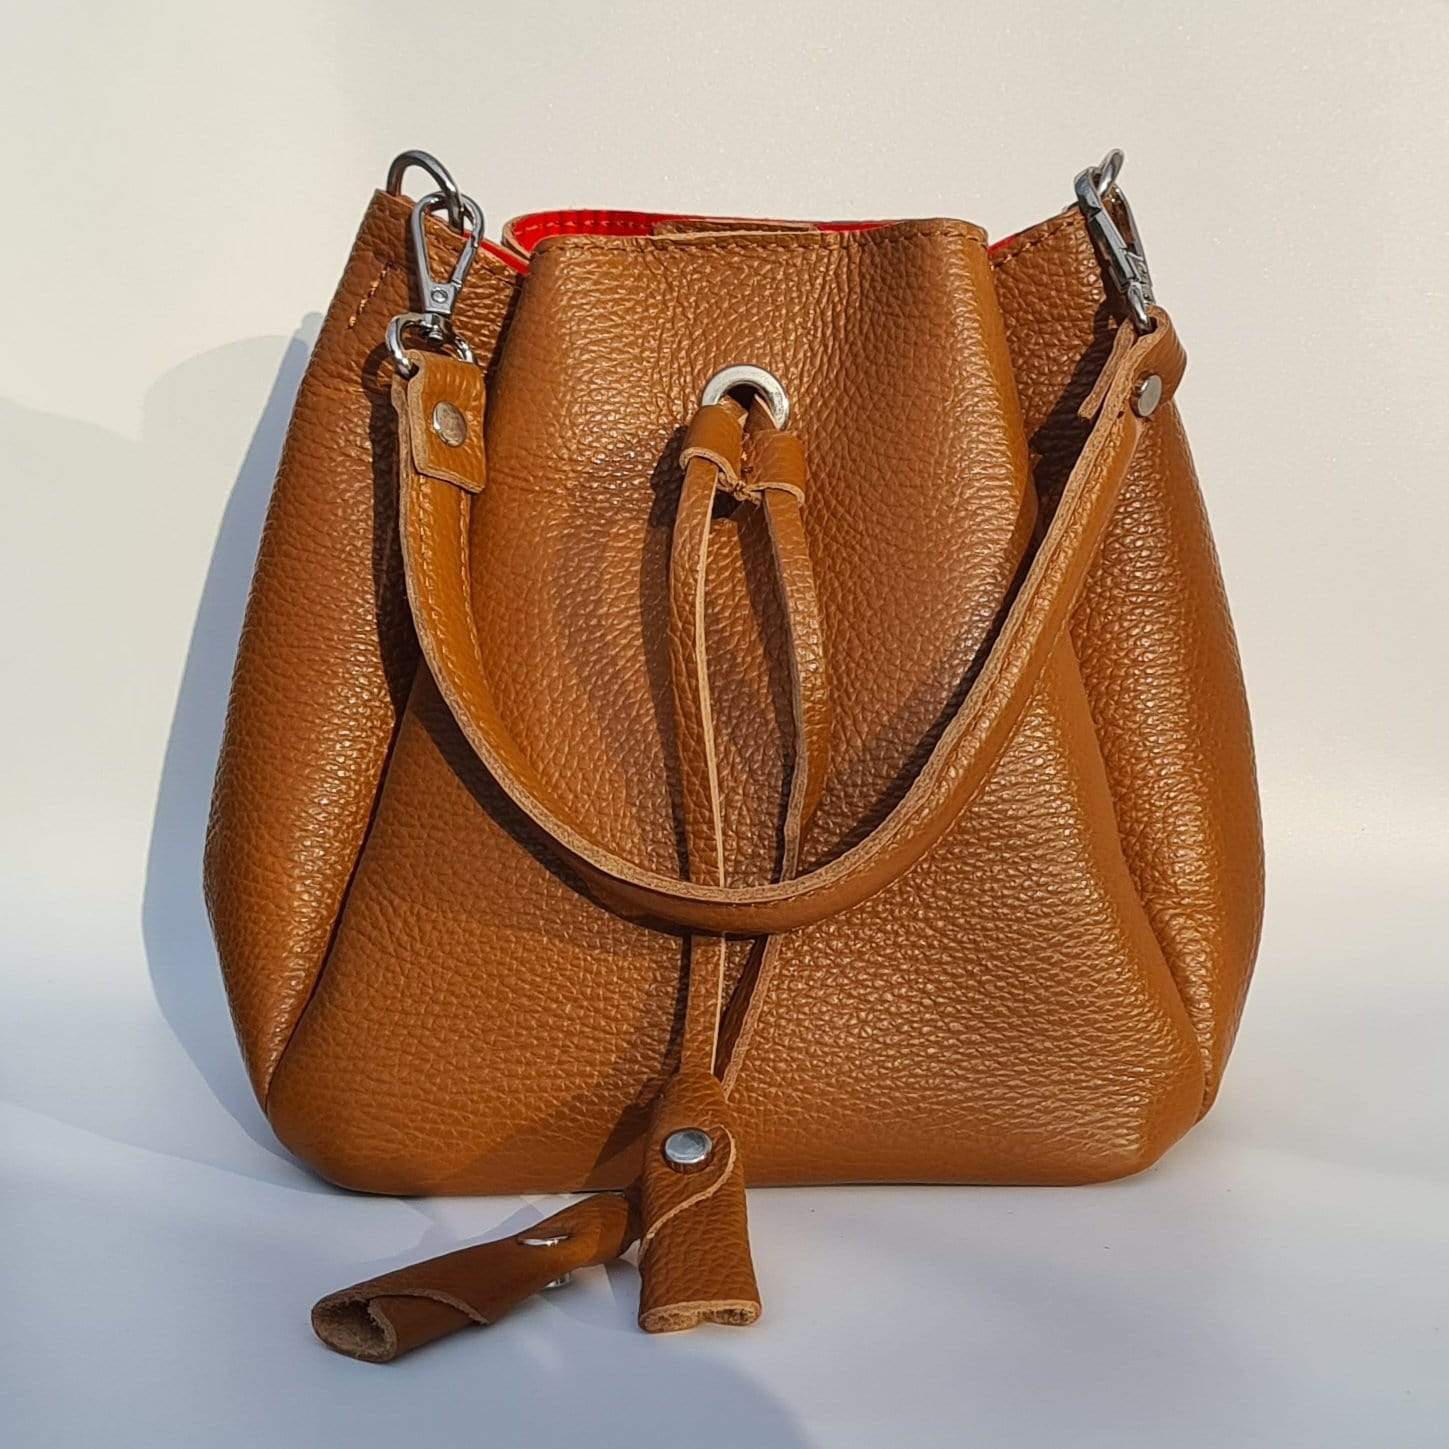 Small bucket bag in tan leather with a tassel